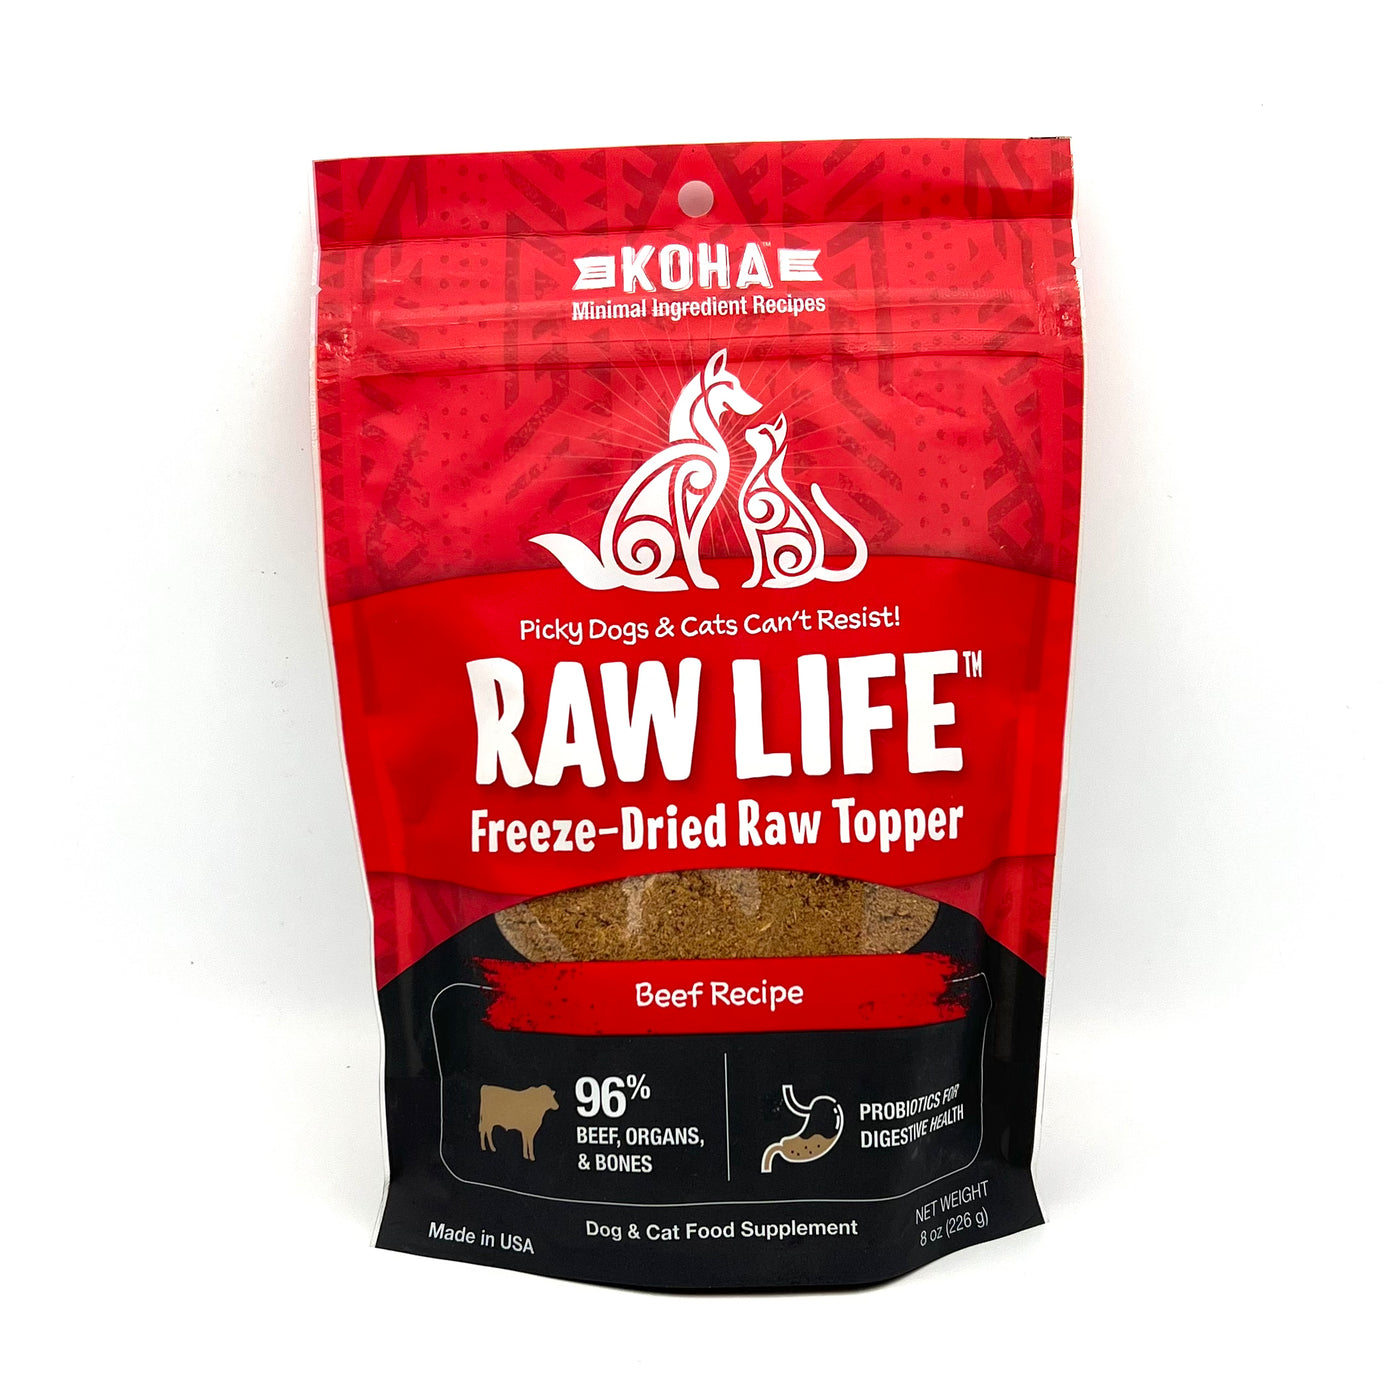 Koha Freeze-Dried Raw Topper Beef Recipe for Dogs and Cats 8oz Bag